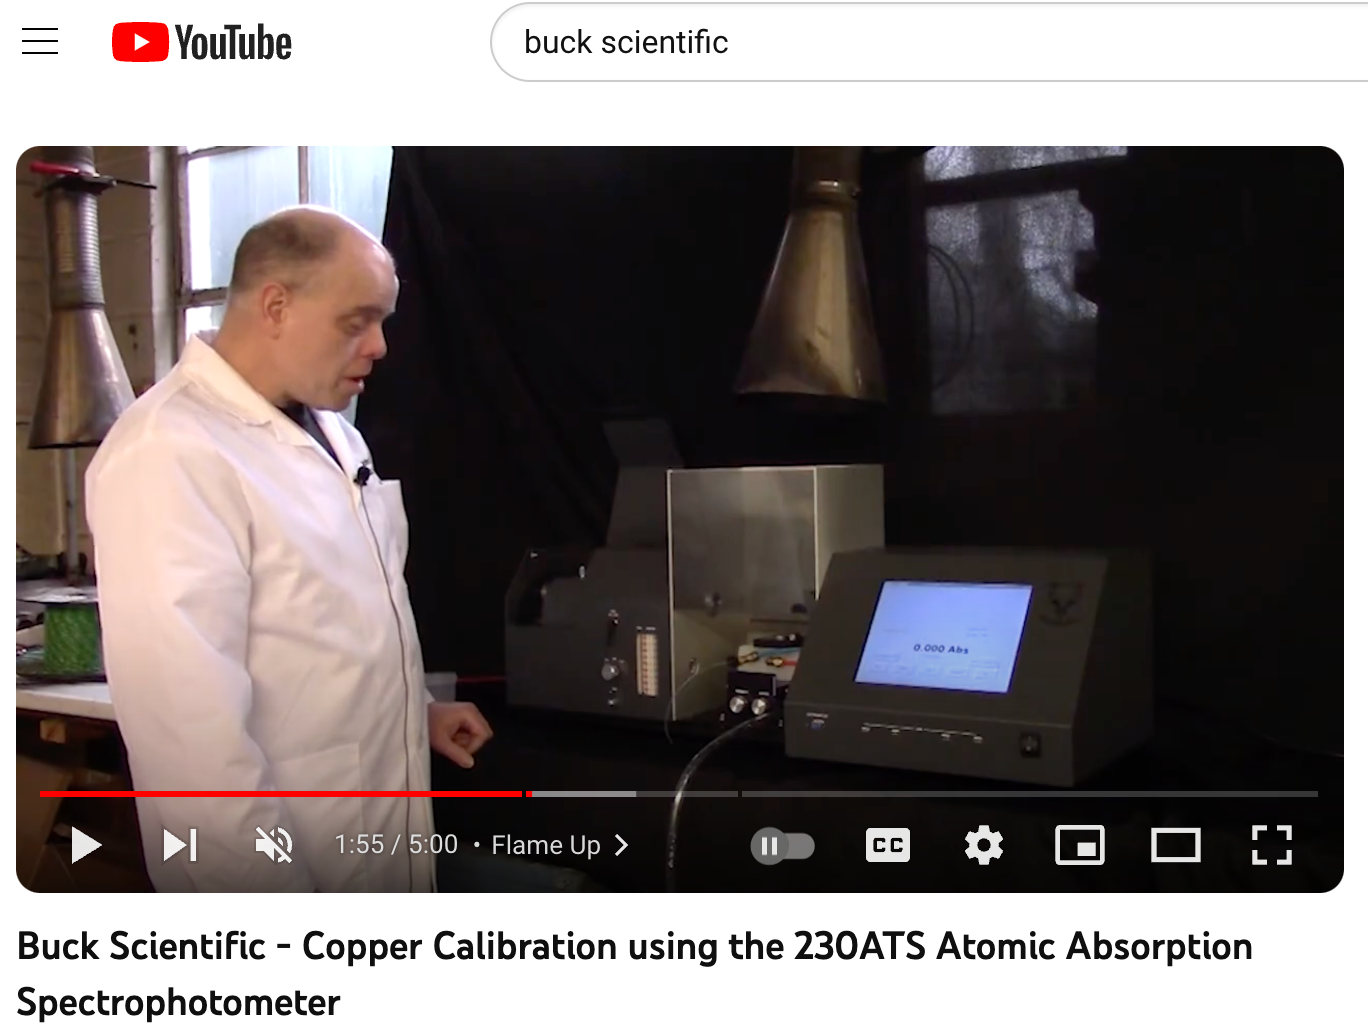 Copper Calibration using the 230ATS Atomic Absorption Spectrophotometer